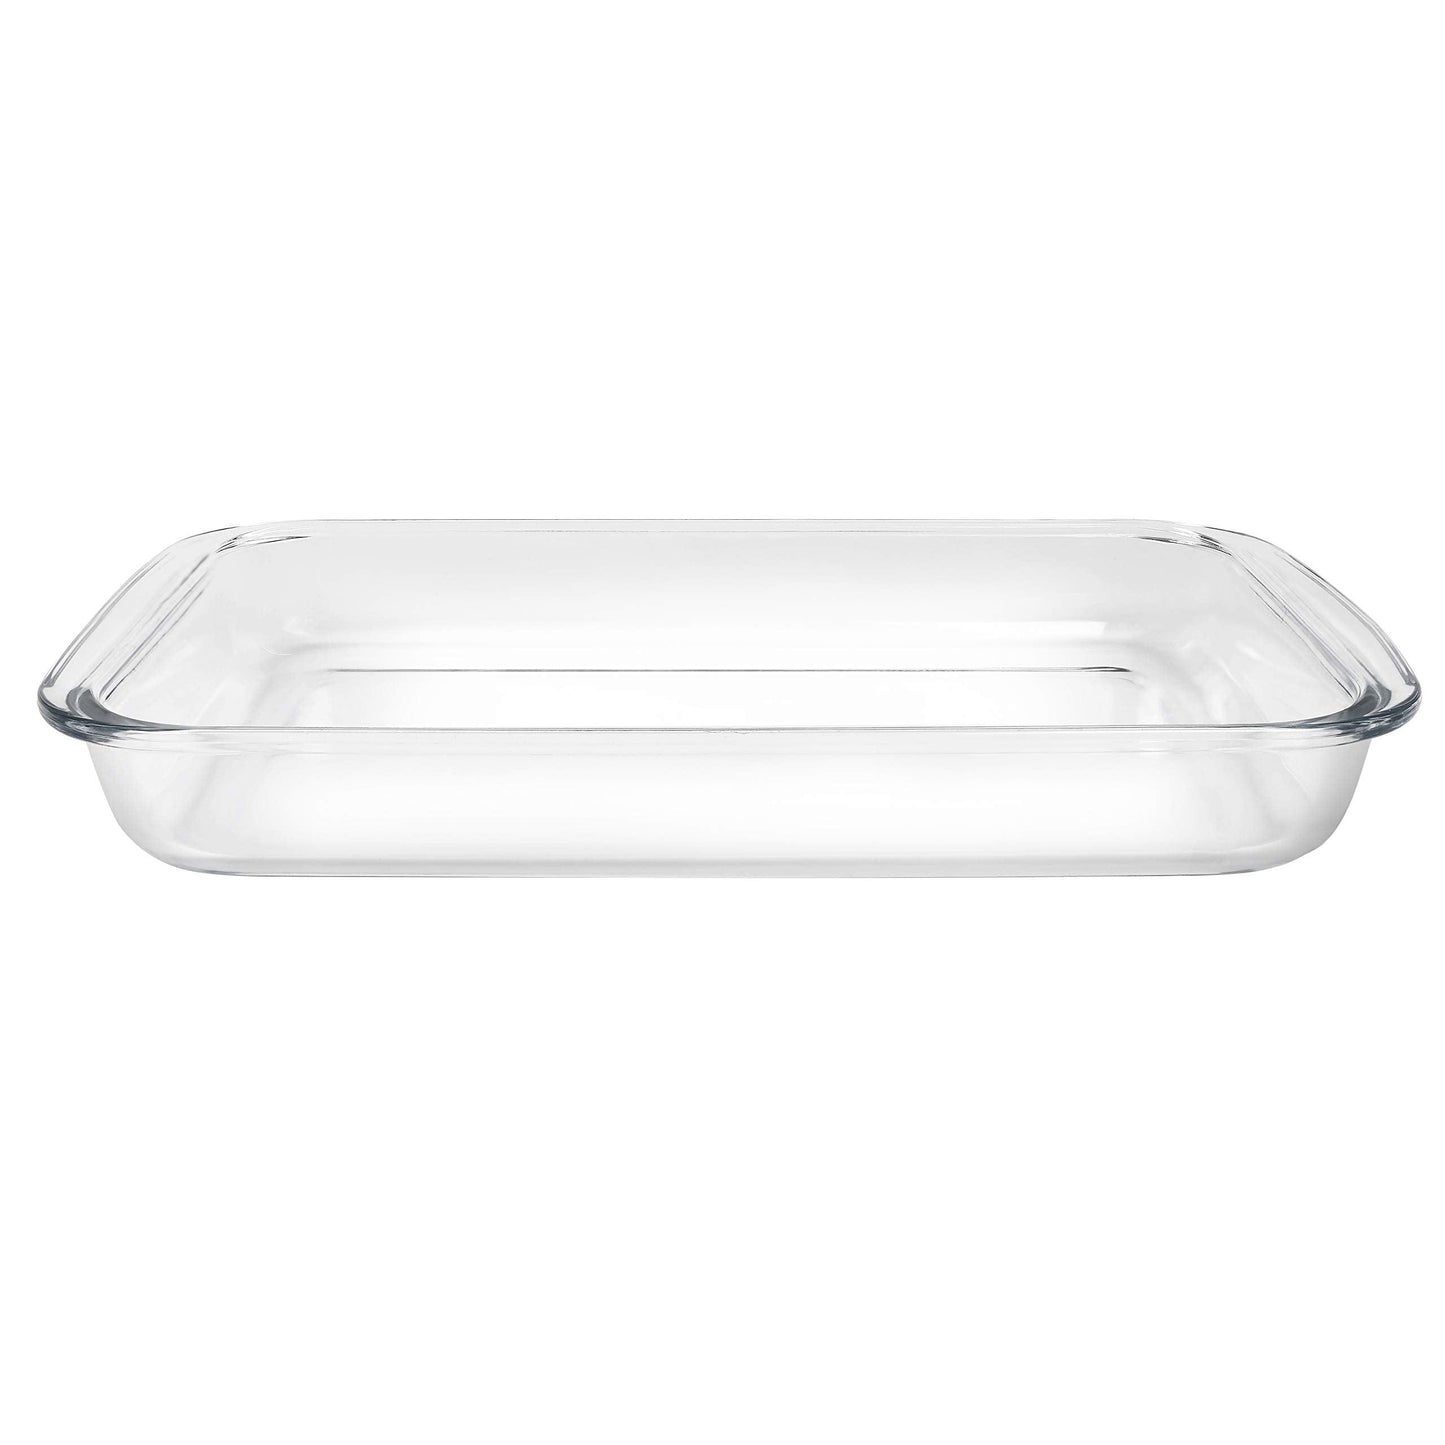 Bovado USA 9" x 13" Inch Glass Oven Baking Dish | High-Grade Borosilicate Glass | 3 Qt Capacity | Nonstick, Dishwasher Safe, Freezer-to-Oven Casserole Pan | No Lid - CookCave